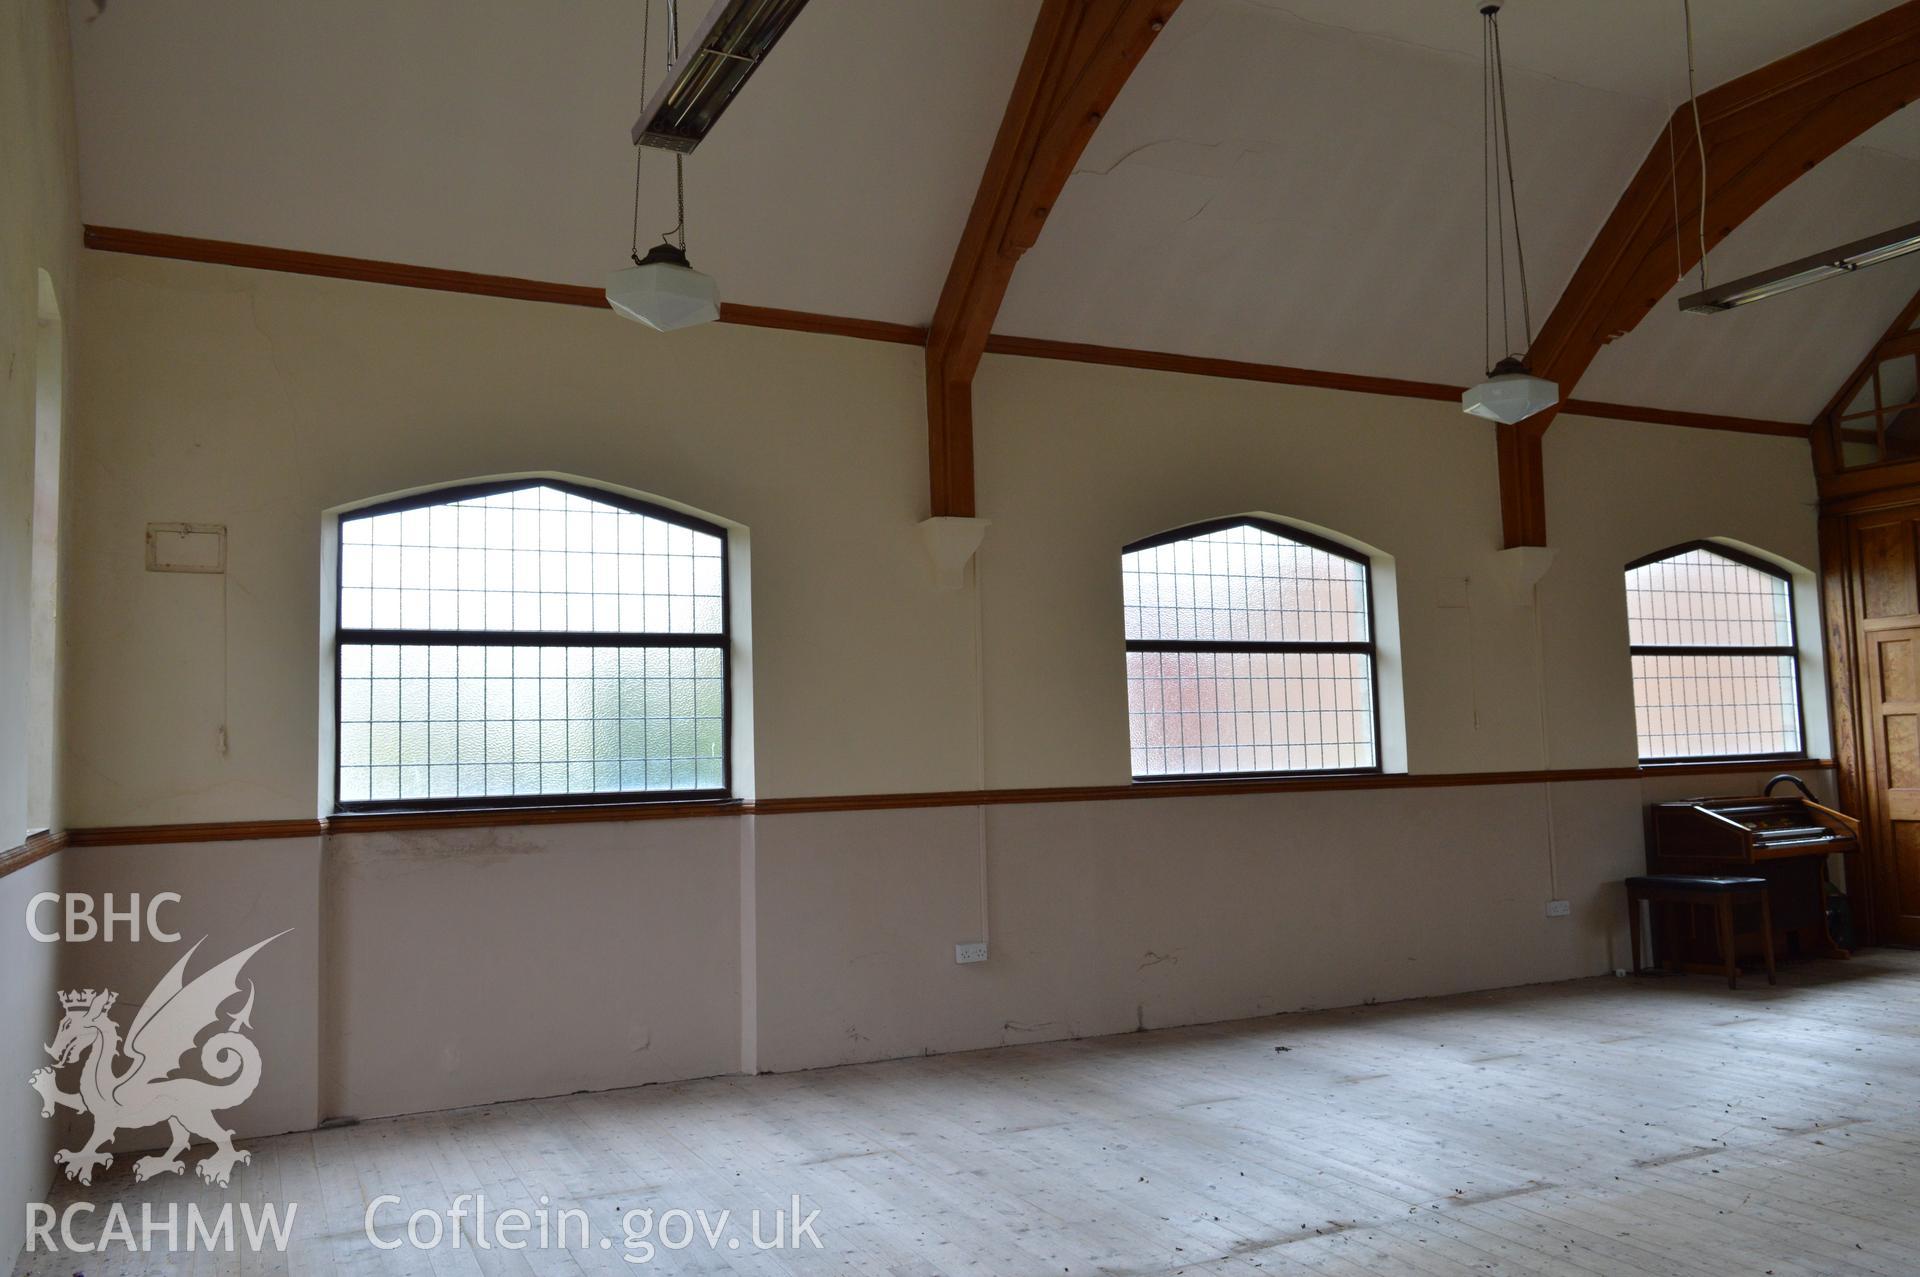 Internal view of north elevation in main church hall. Digital colour photograph taken during CPAT Project 2396 at the United Reformed Church in Northop. Prepared by Clwyd Powys Archaeological Trust, 2018-2019.